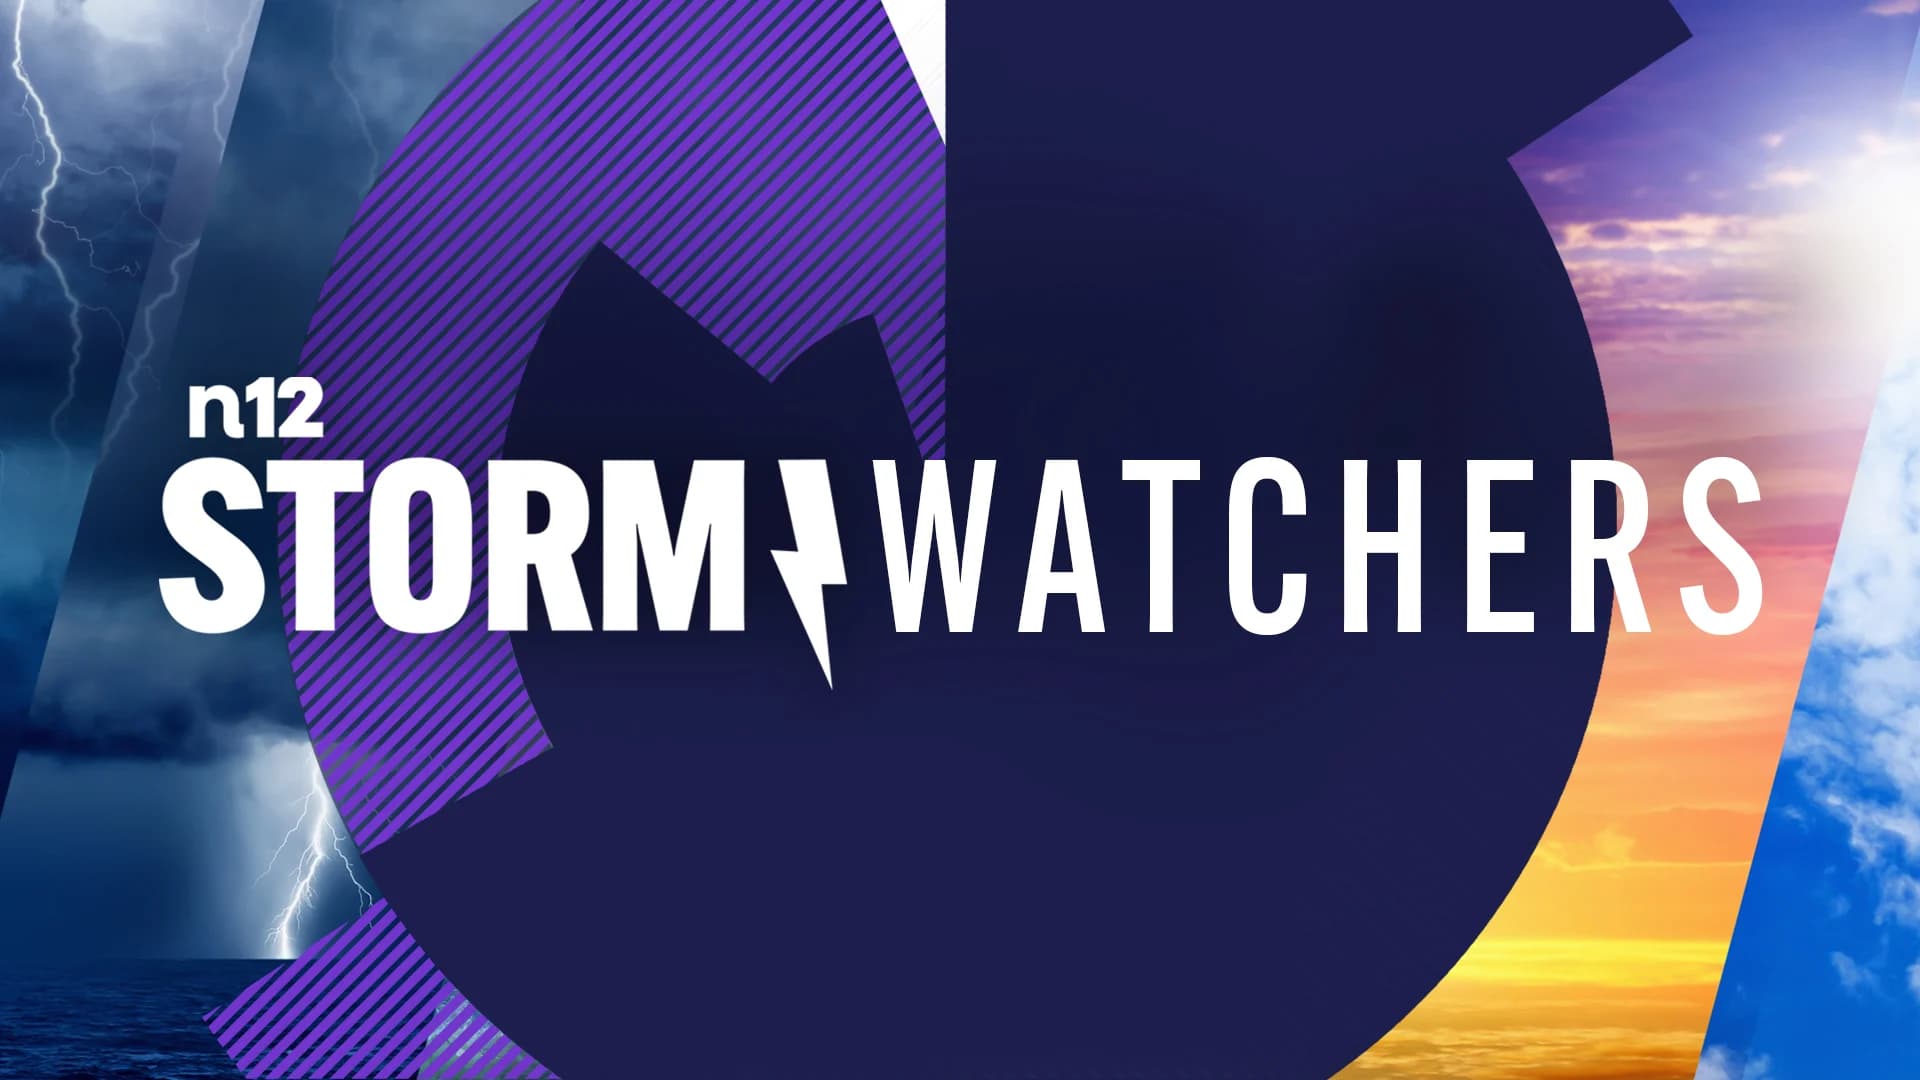 Want to be a #News12StormWatcher? Here’s what you need to know.